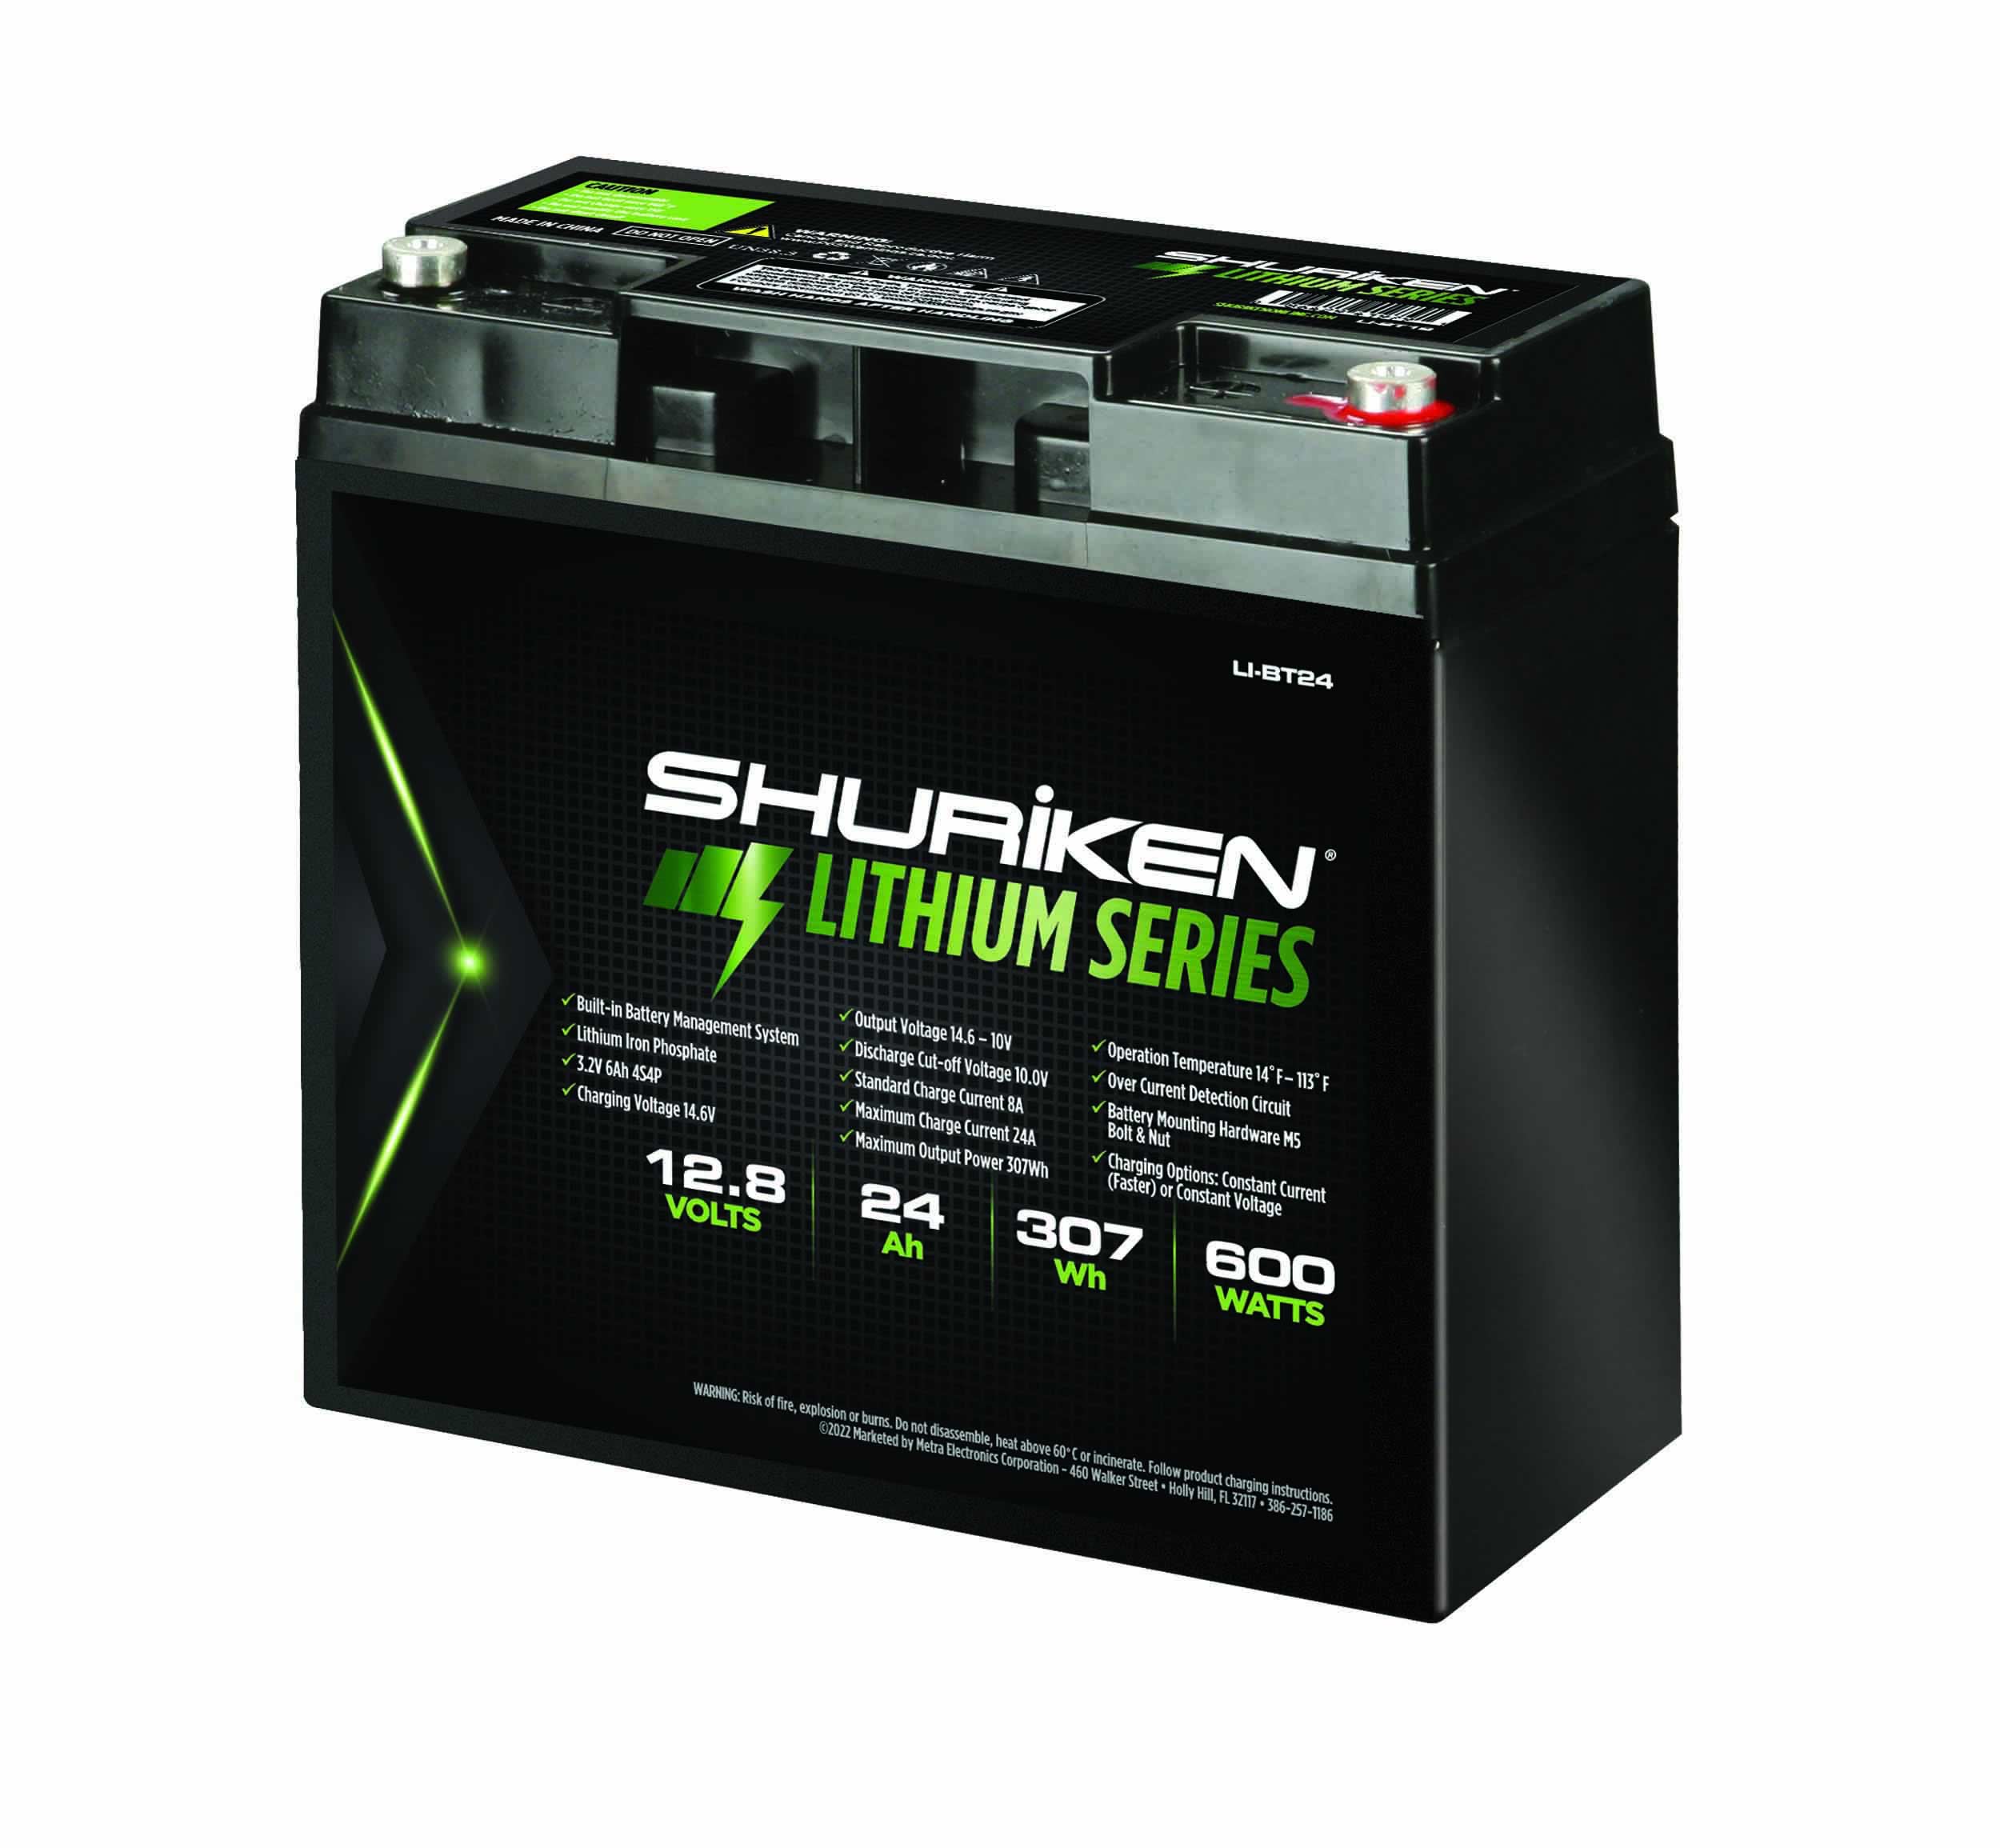 600W / 24 Amp Hours Lithium Iron Battery